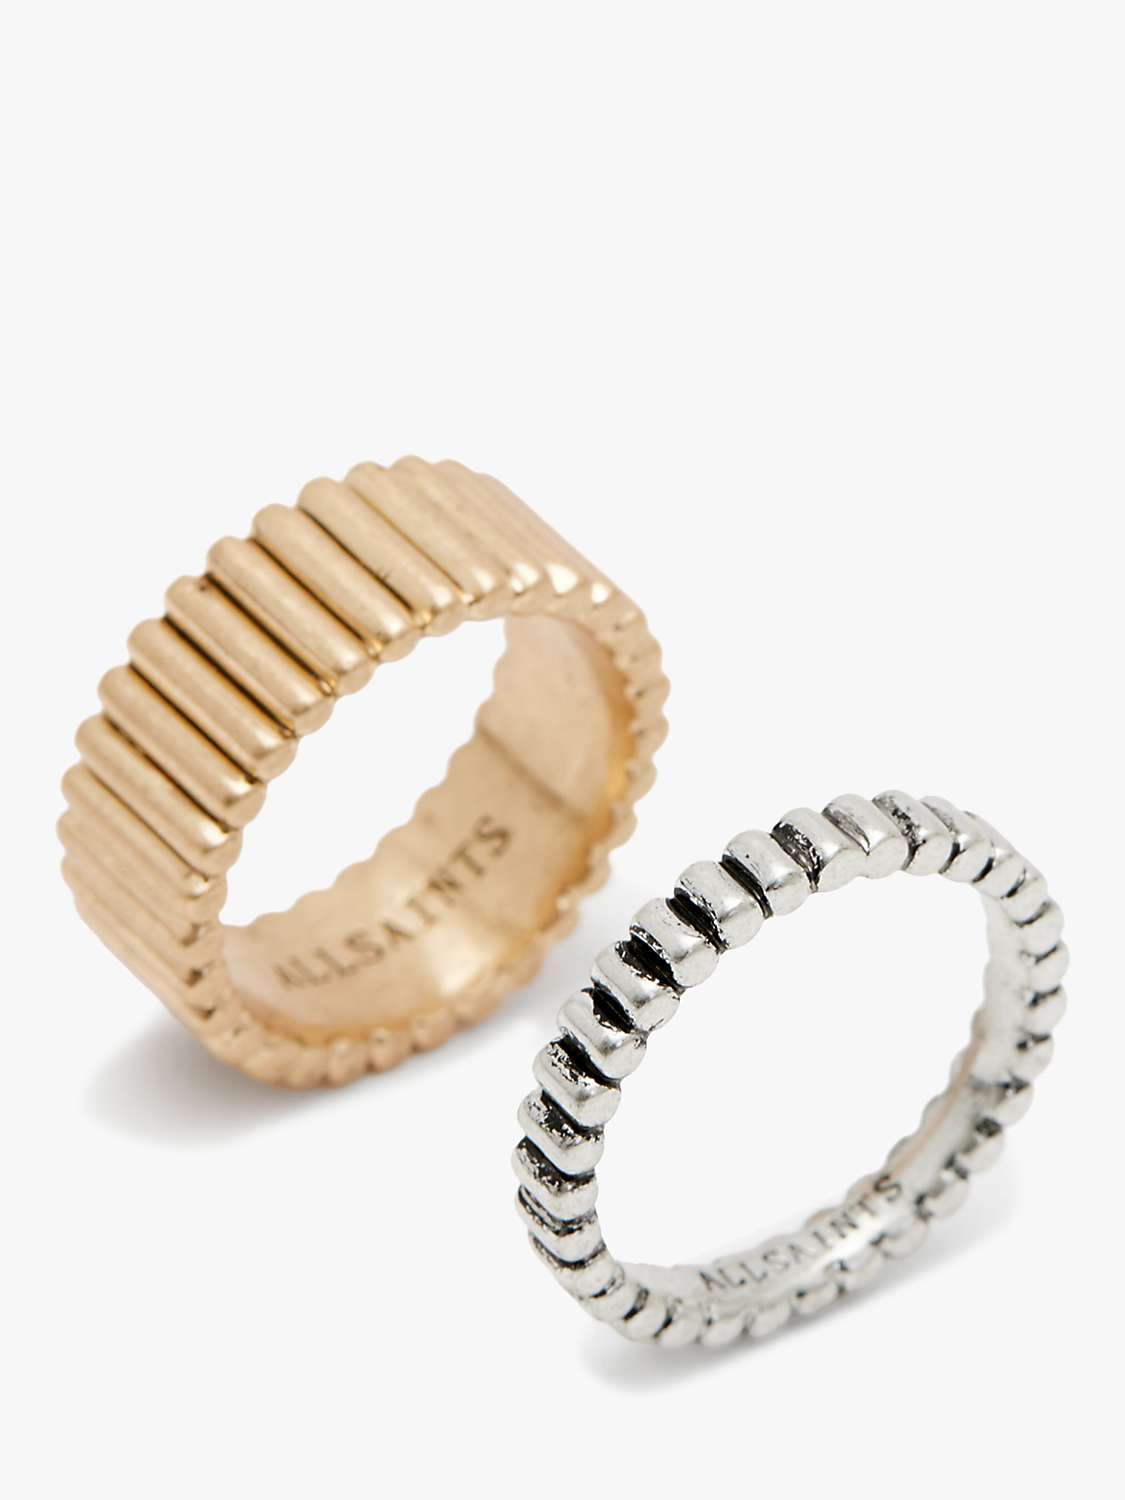 Buy AllSaints Duo Ribbed Band Ring, Set of 2, Gold/Silver Online at johnlewis.com